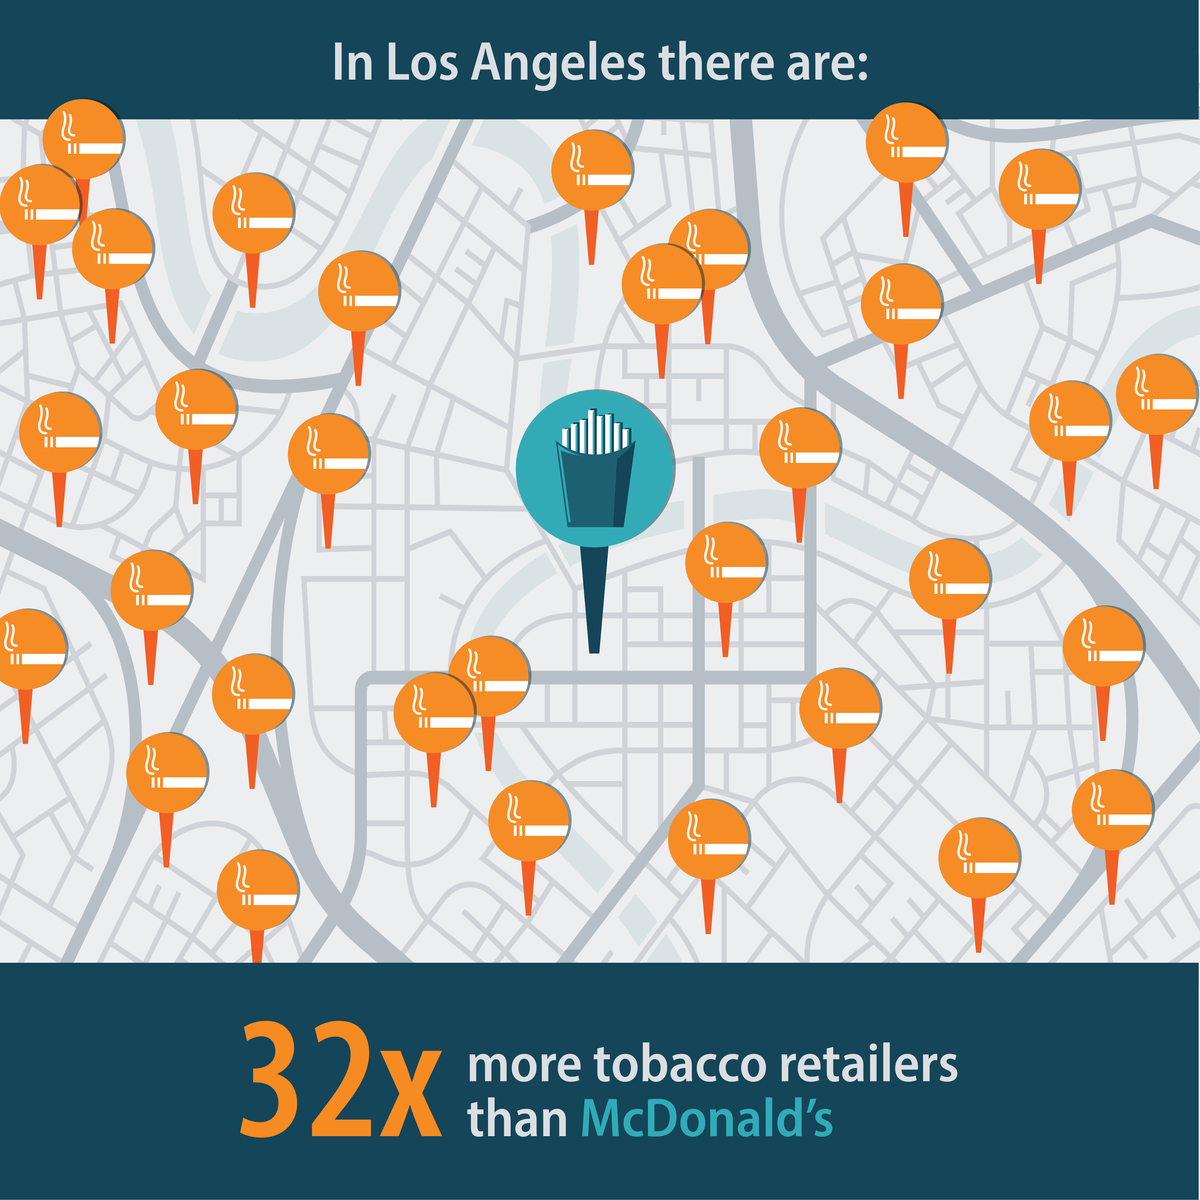 In Los Angeles there are: 32 times more tobacco retailers than McDonald's